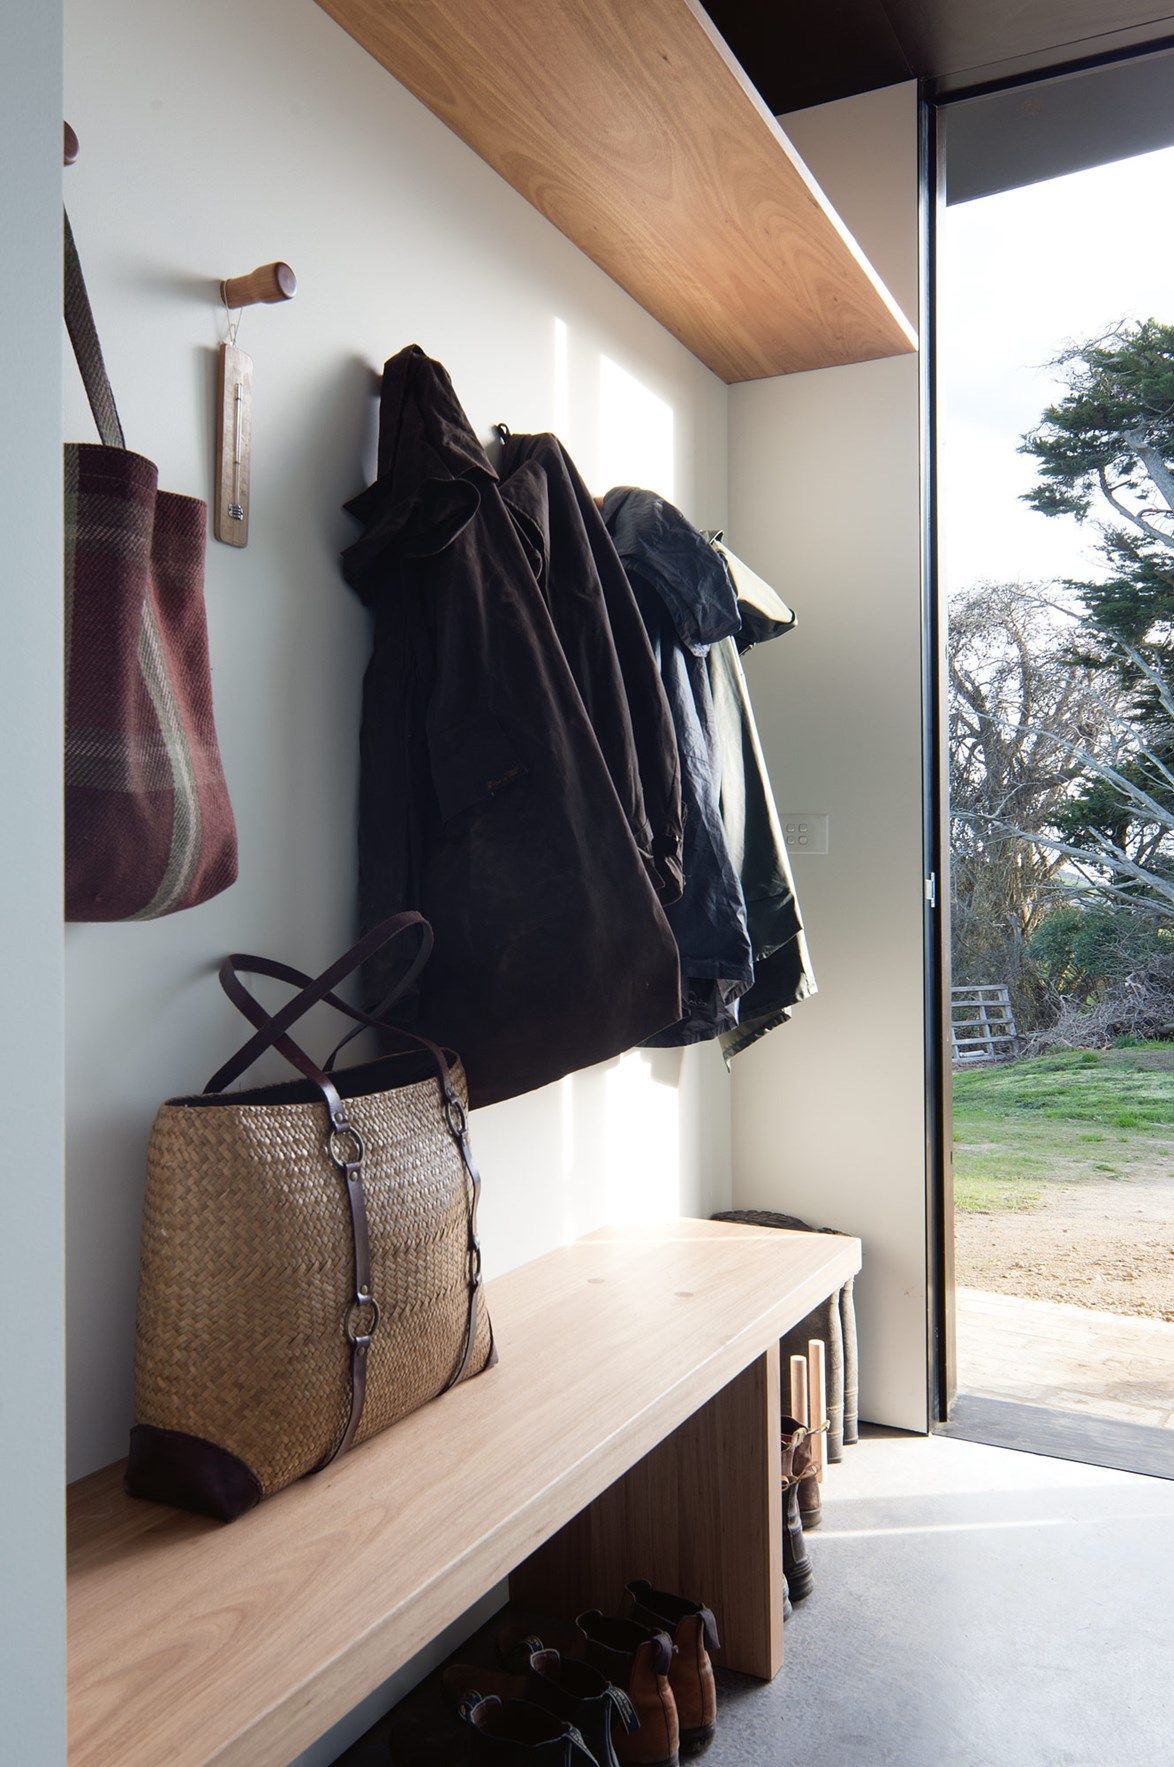 High storage, wall storage and under-bench storage is the perfect mix in this minimalist mudroom design.